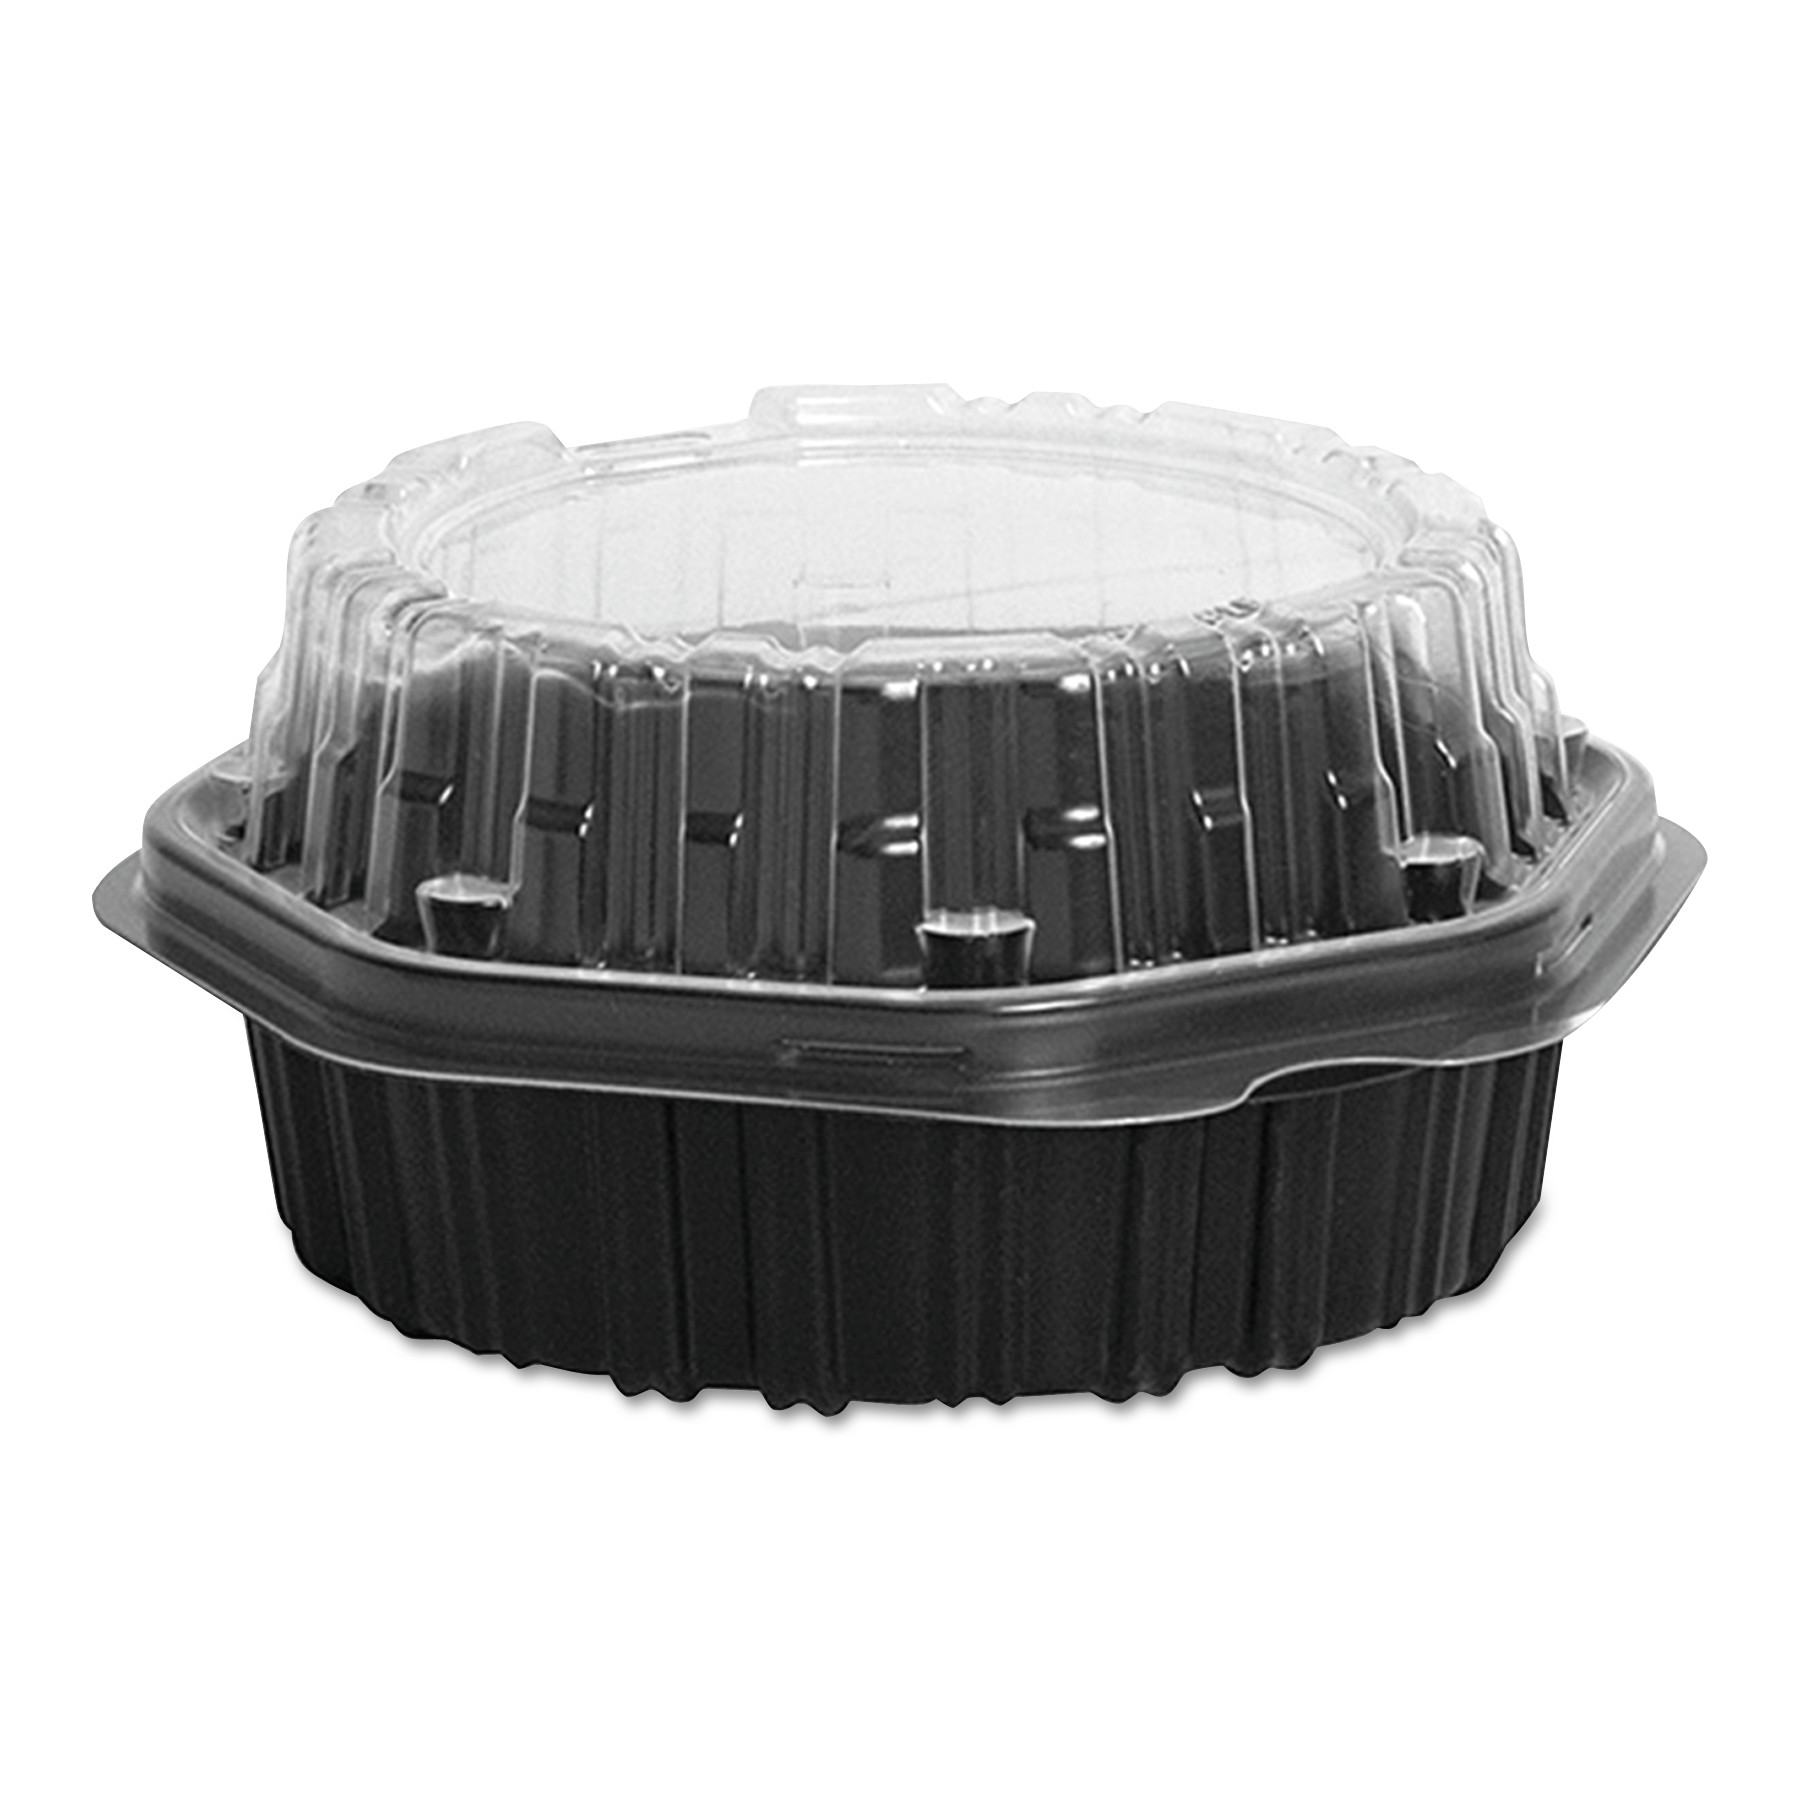 Creative Carryouts Hinged Plastic Hot Deli Boxes, 6.3